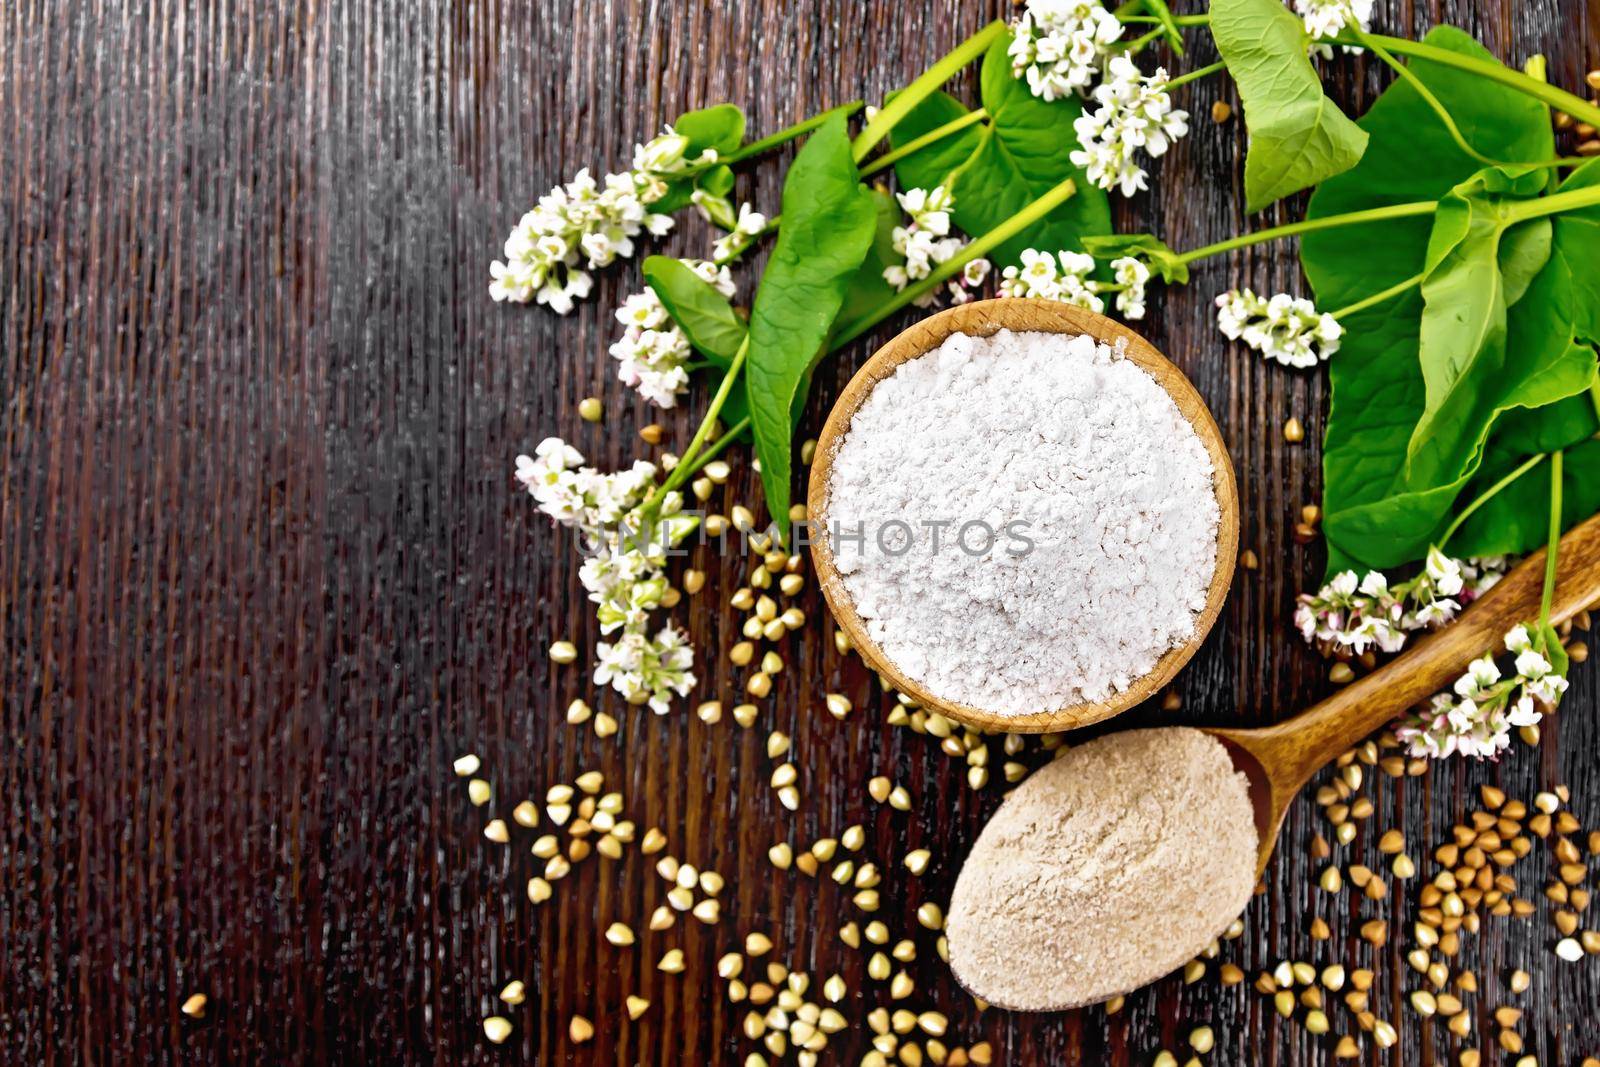 Buckwheat flour from green cereals in a bowl, buckwheat flour from brown groats in a spoon, flowers and leaves on the background of a wooden board from above